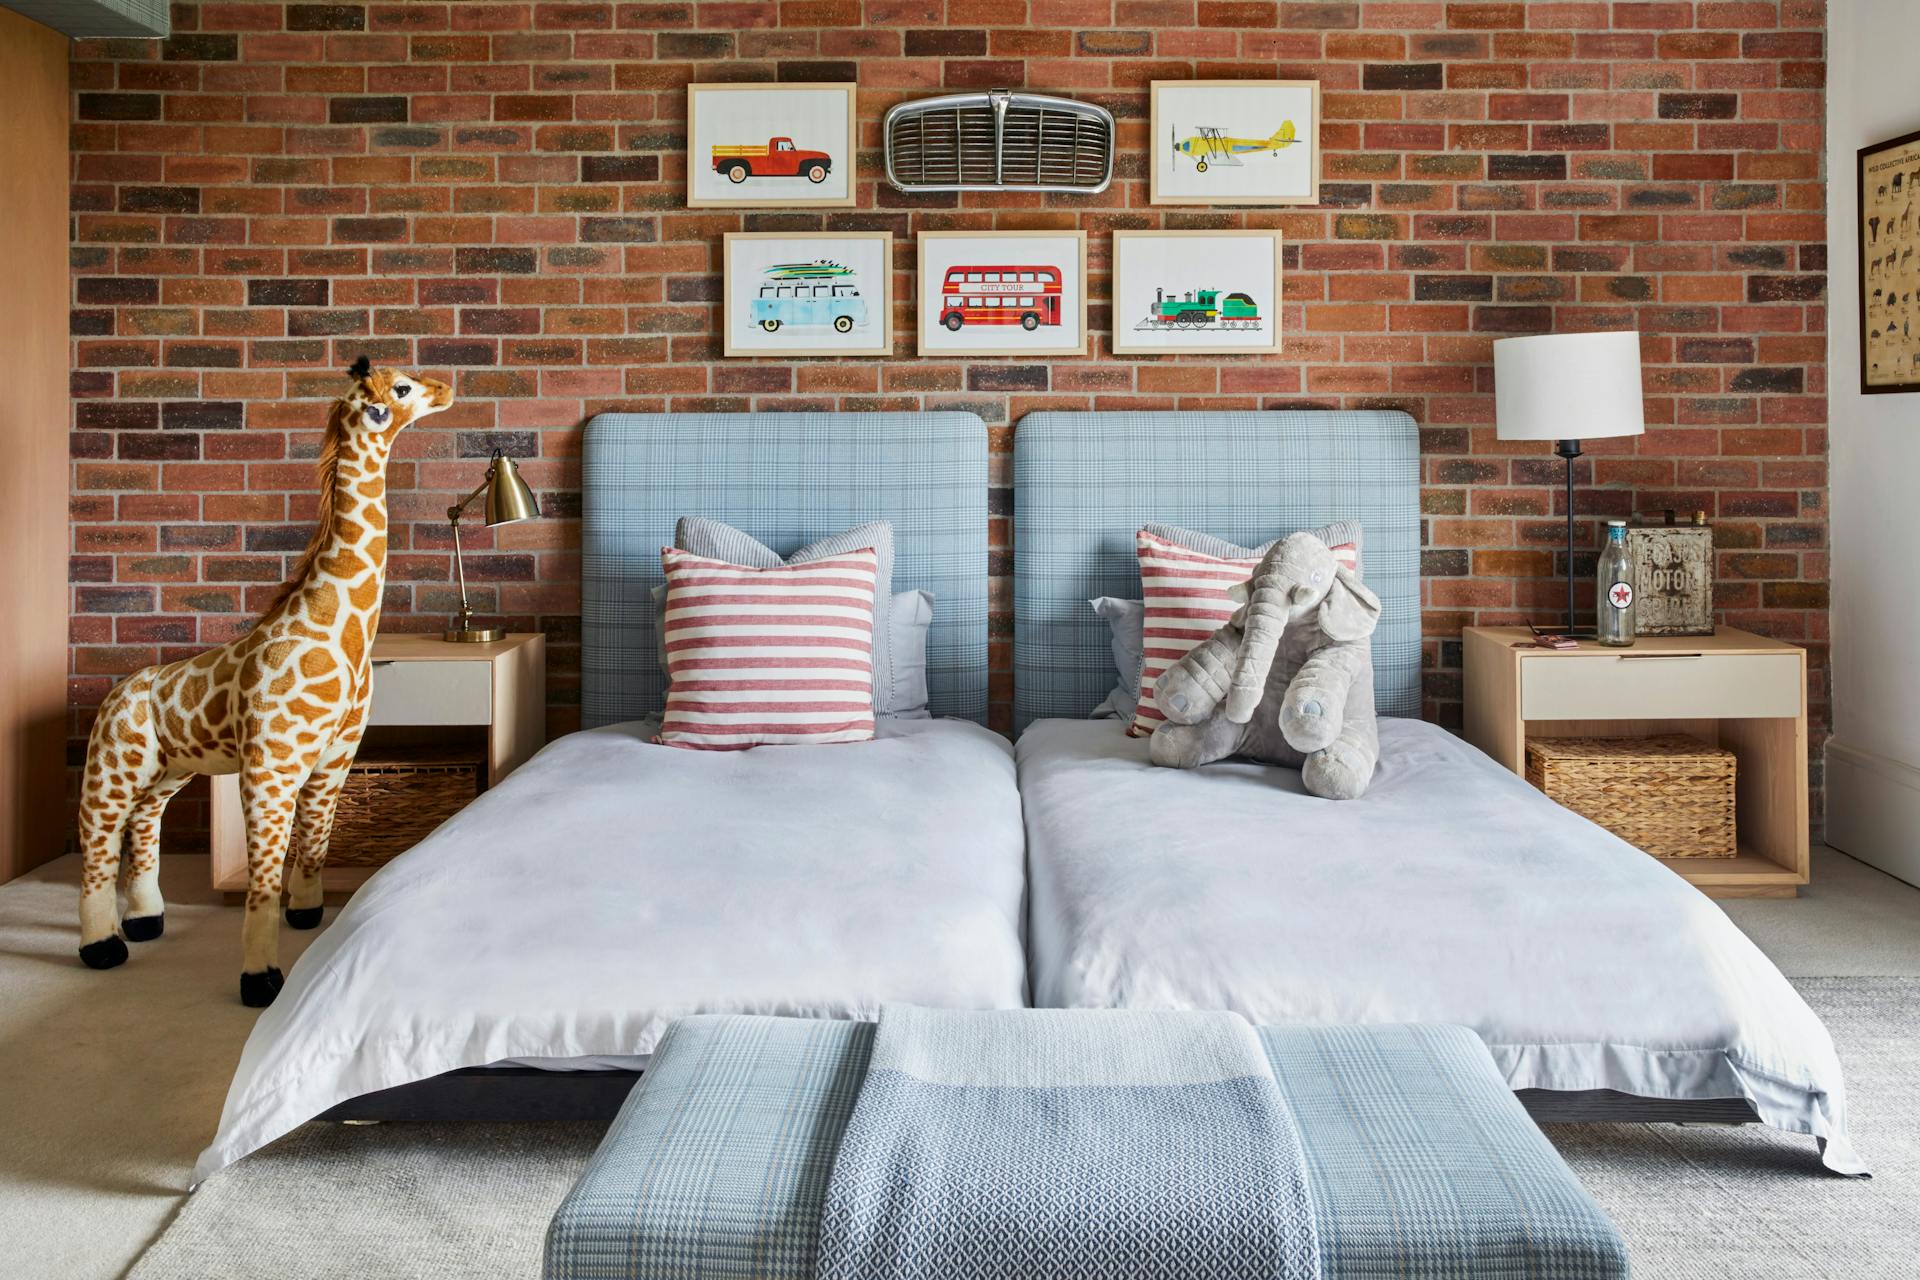 Two low-slung twin beds sit side by side in what appears to be a children's bedroom. The bed linen is a pale blue or grey, while the twin headboards and single ottoman are upholstered in plaid, and cushions on the bed are striped red. On one bed is a plush elephant, beside the other bed is a plush giraffe, and on the brick wall behind the bed are a vintage car's grille with five framed illustrations of vehicles: a pickup truck, small plane, VW van, double-decker bus and steam train.